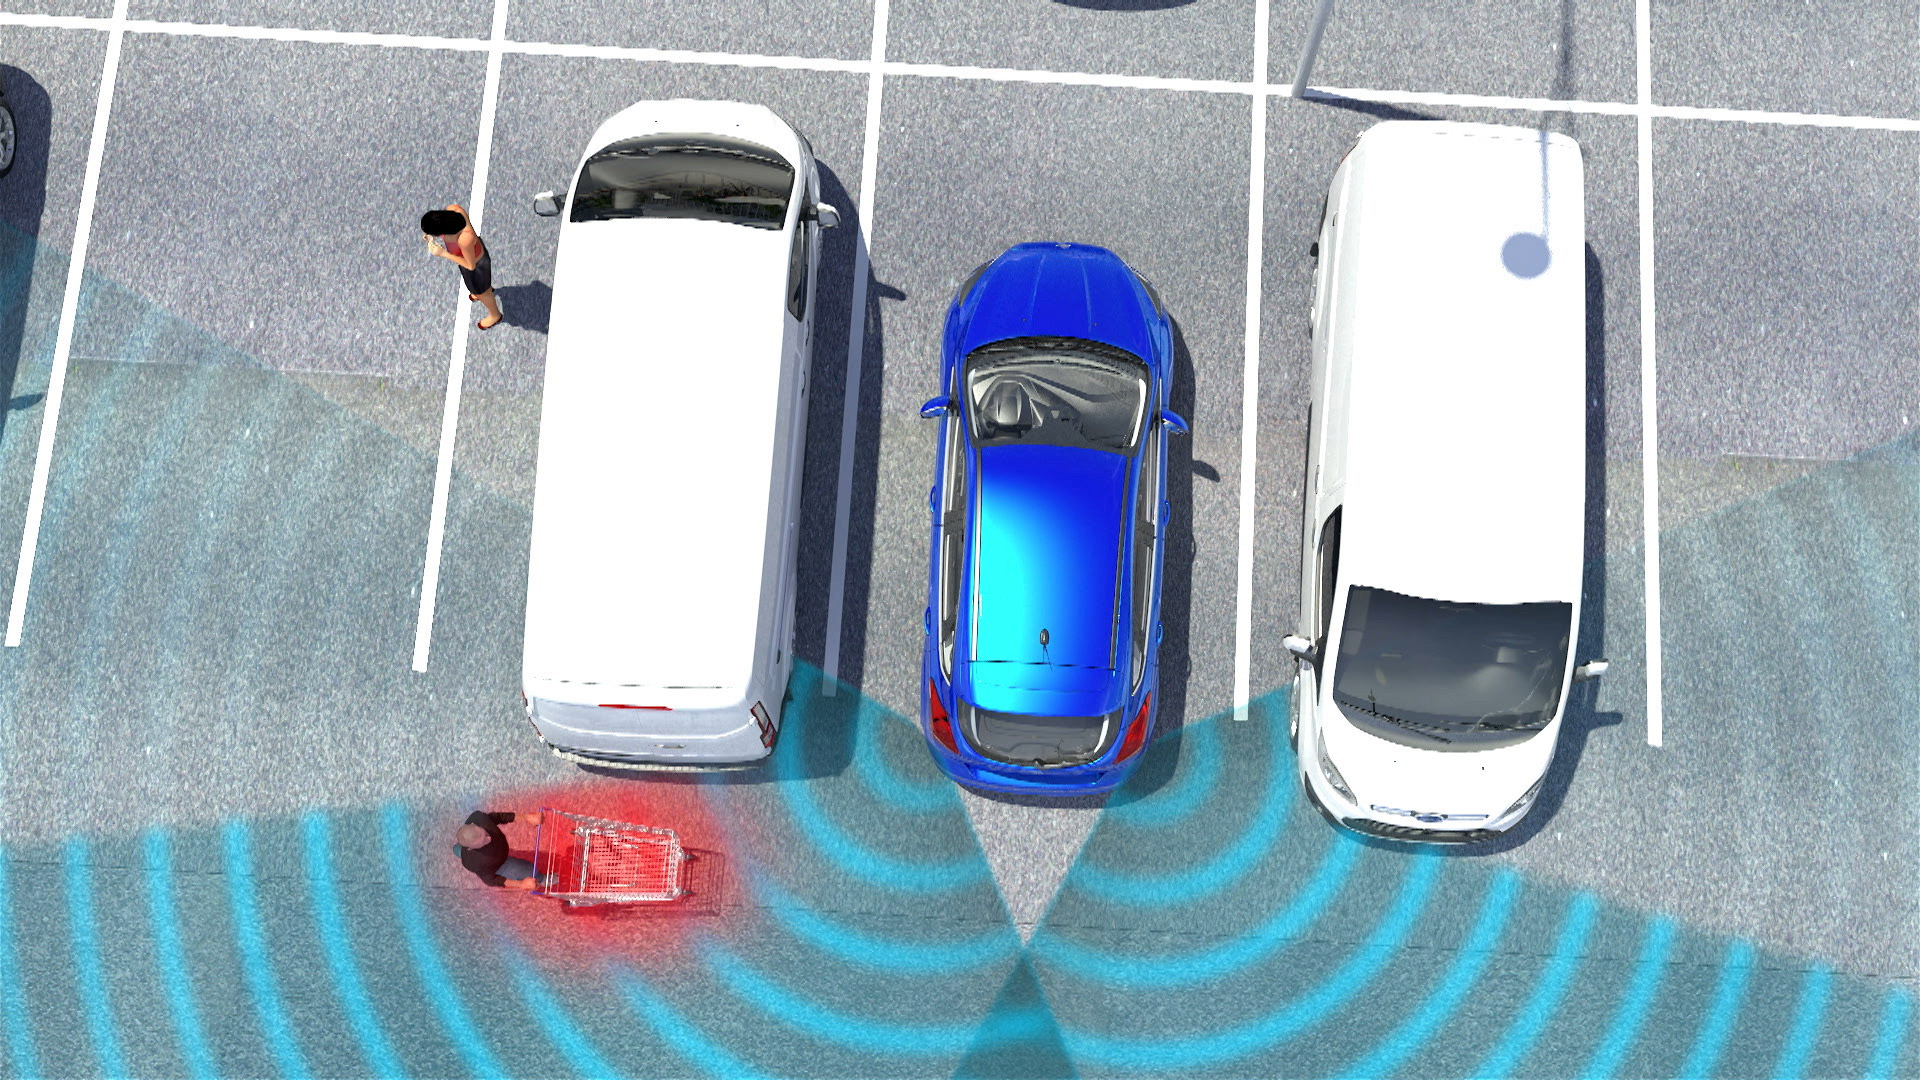 Ford's next wave of driverassist technologies will protect you from